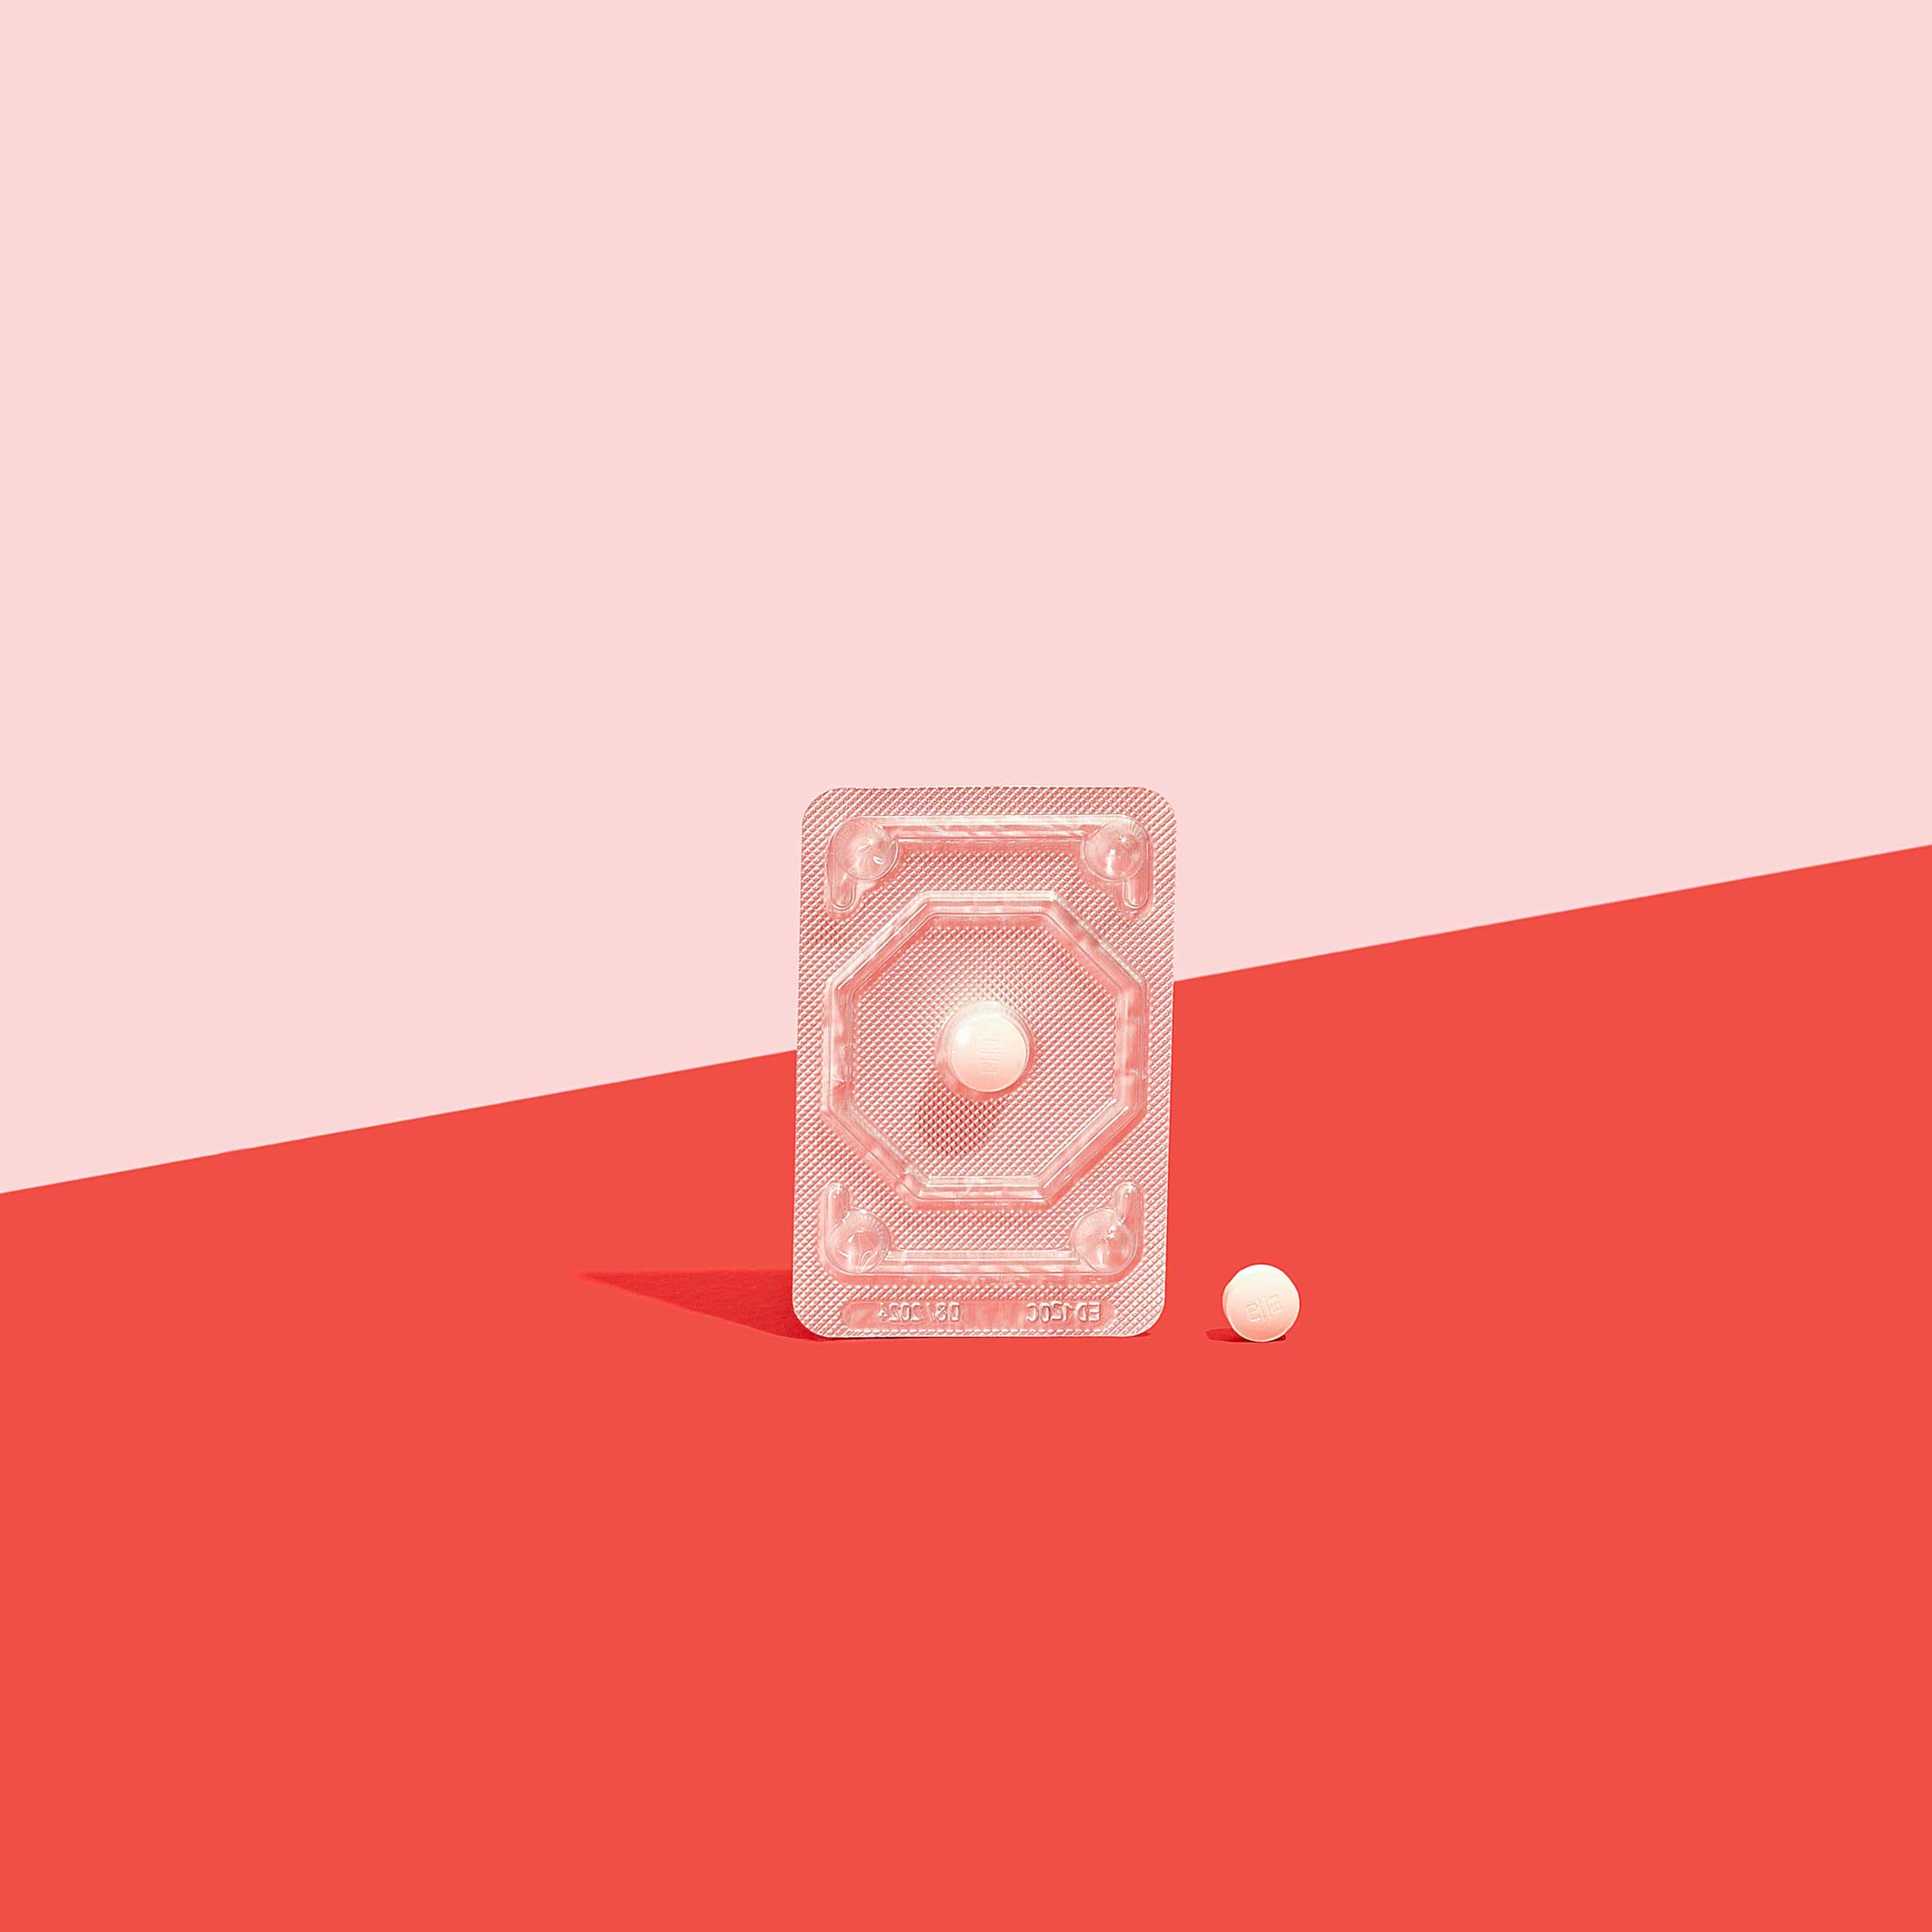 Ella emergency contraception in foil packet to prevent pregnancy on a red surface, on a pink background